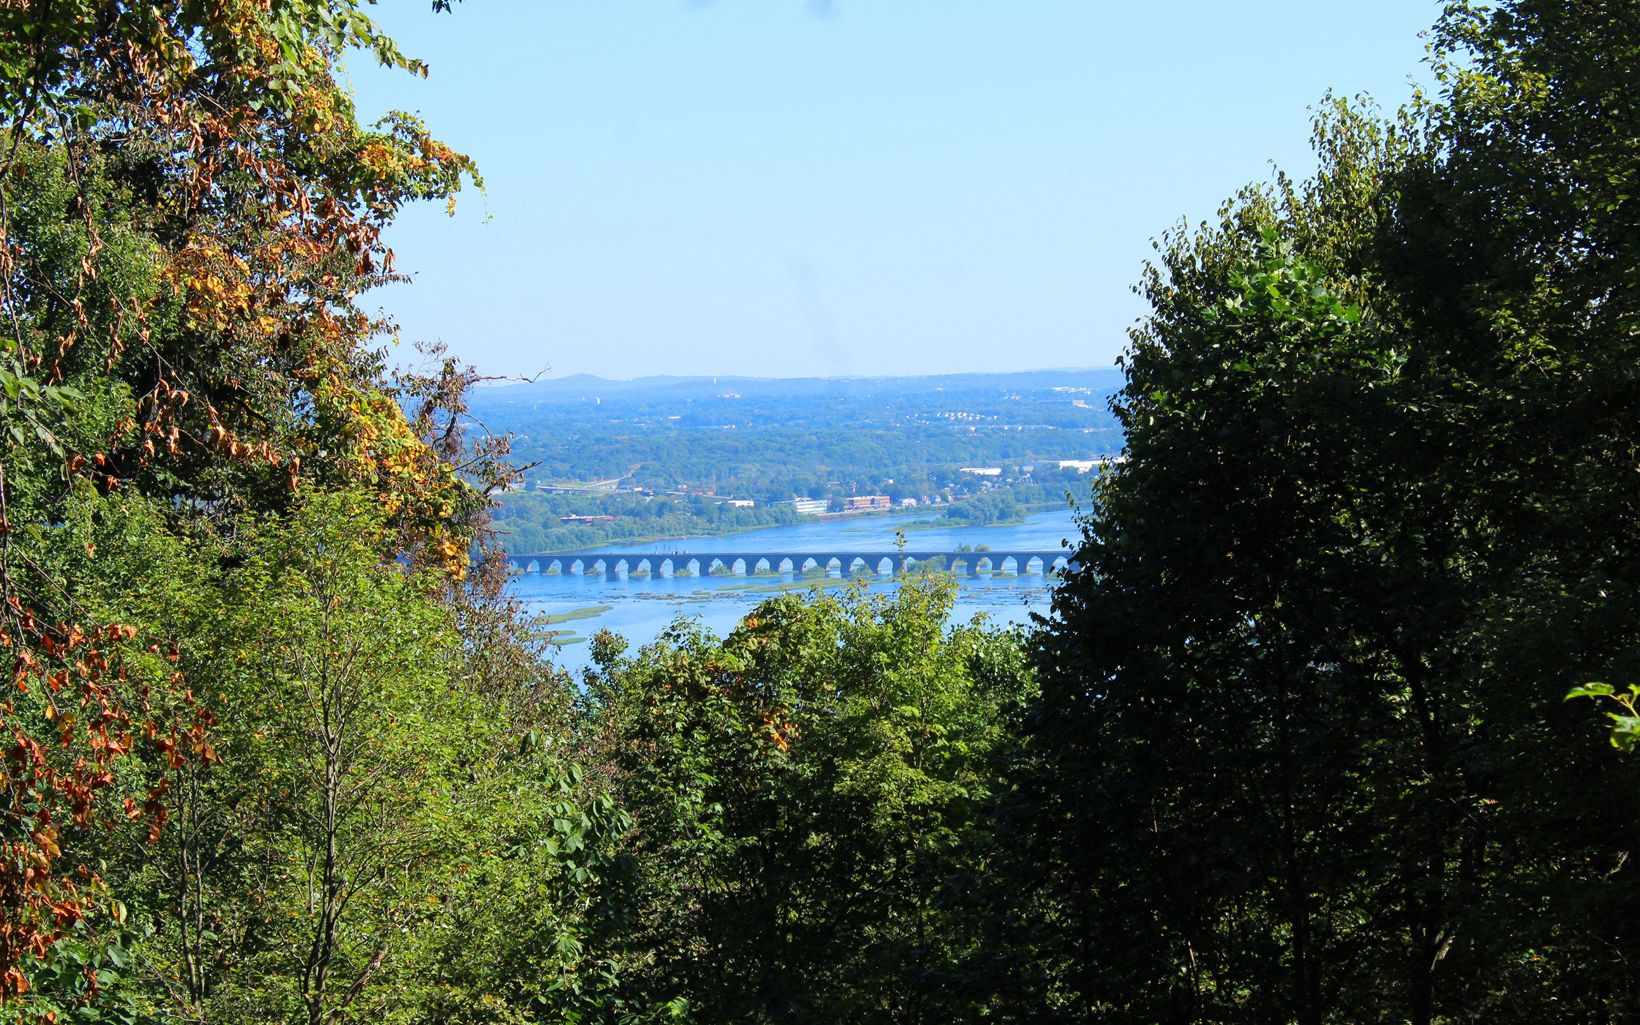 Trees frame a view of a bridge stretching across the Susquehanna.